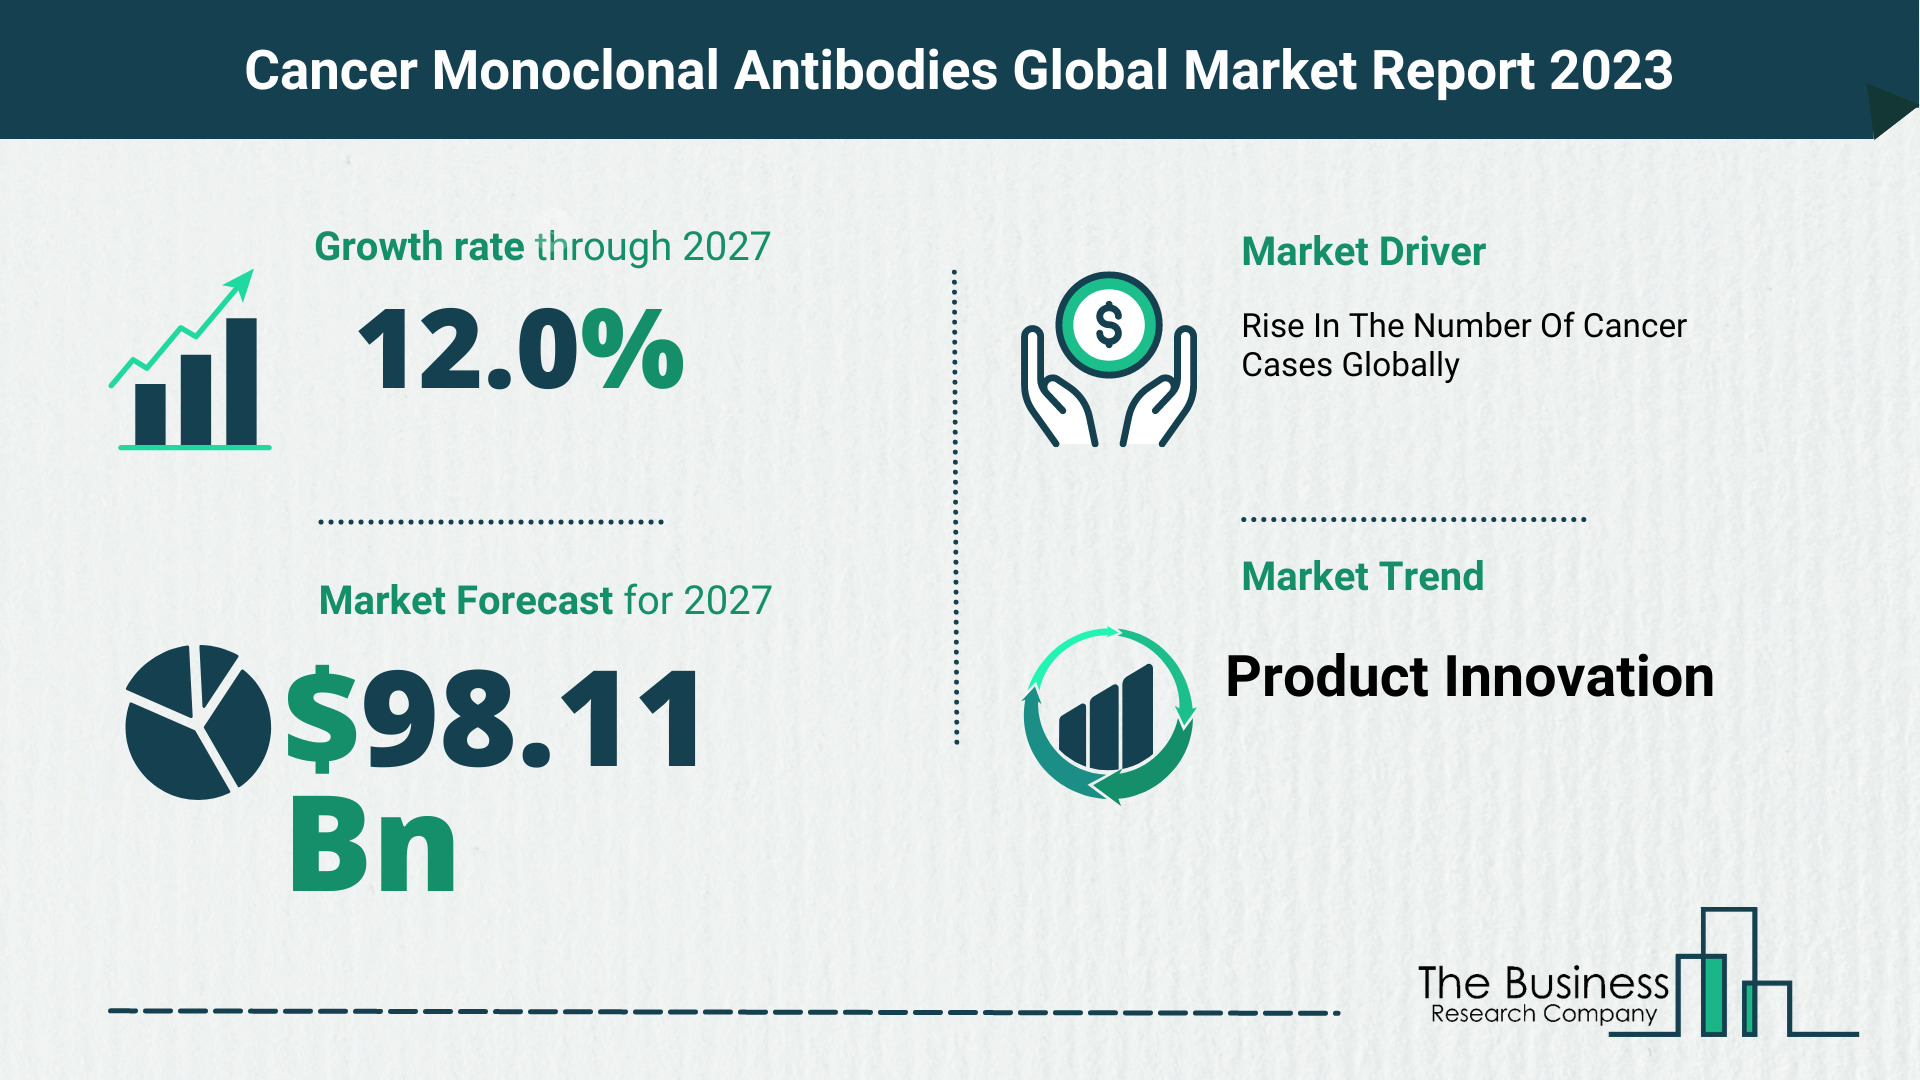 Global Cancer Monoclonal Antibodies Market Opportunities And Strategies 2023